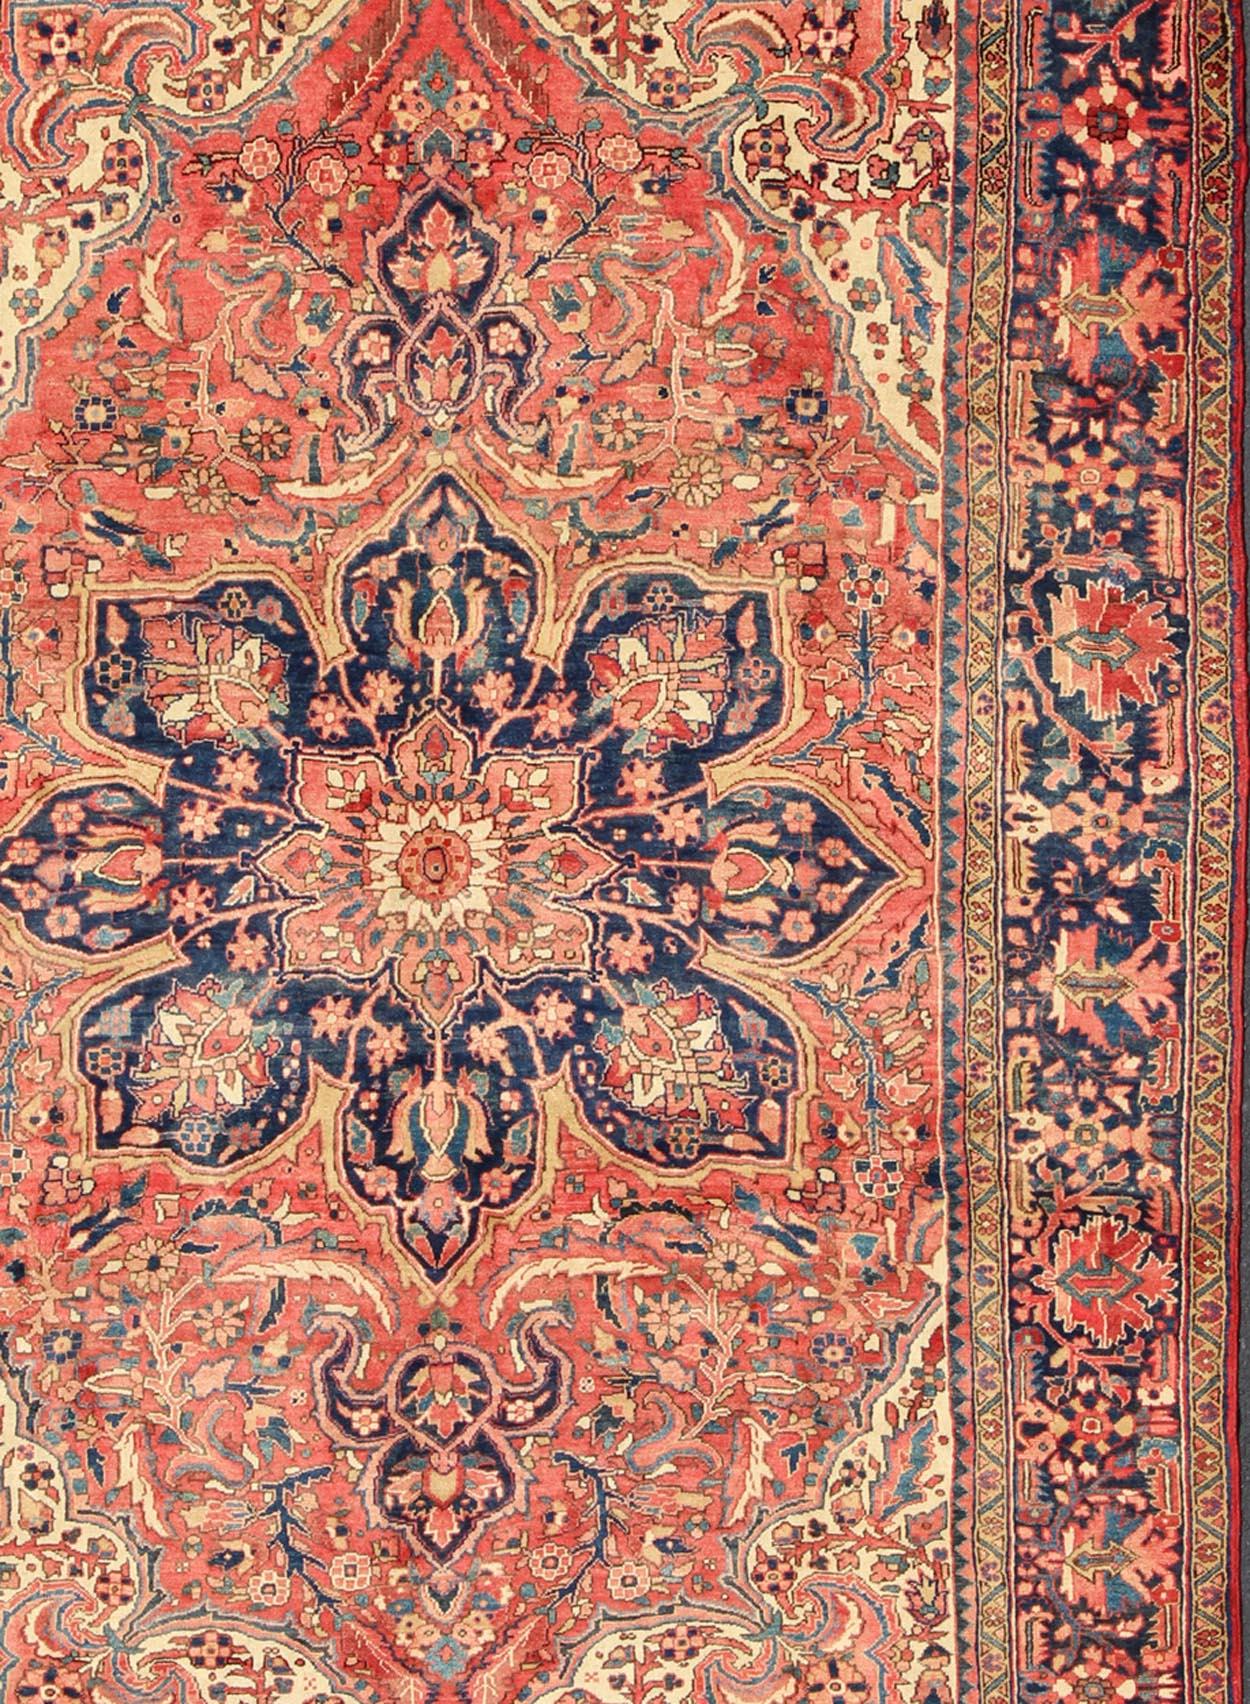 Hand-Knotted Vintage Persian Heriz Rug with Floral Medallion Design in Red and Blue